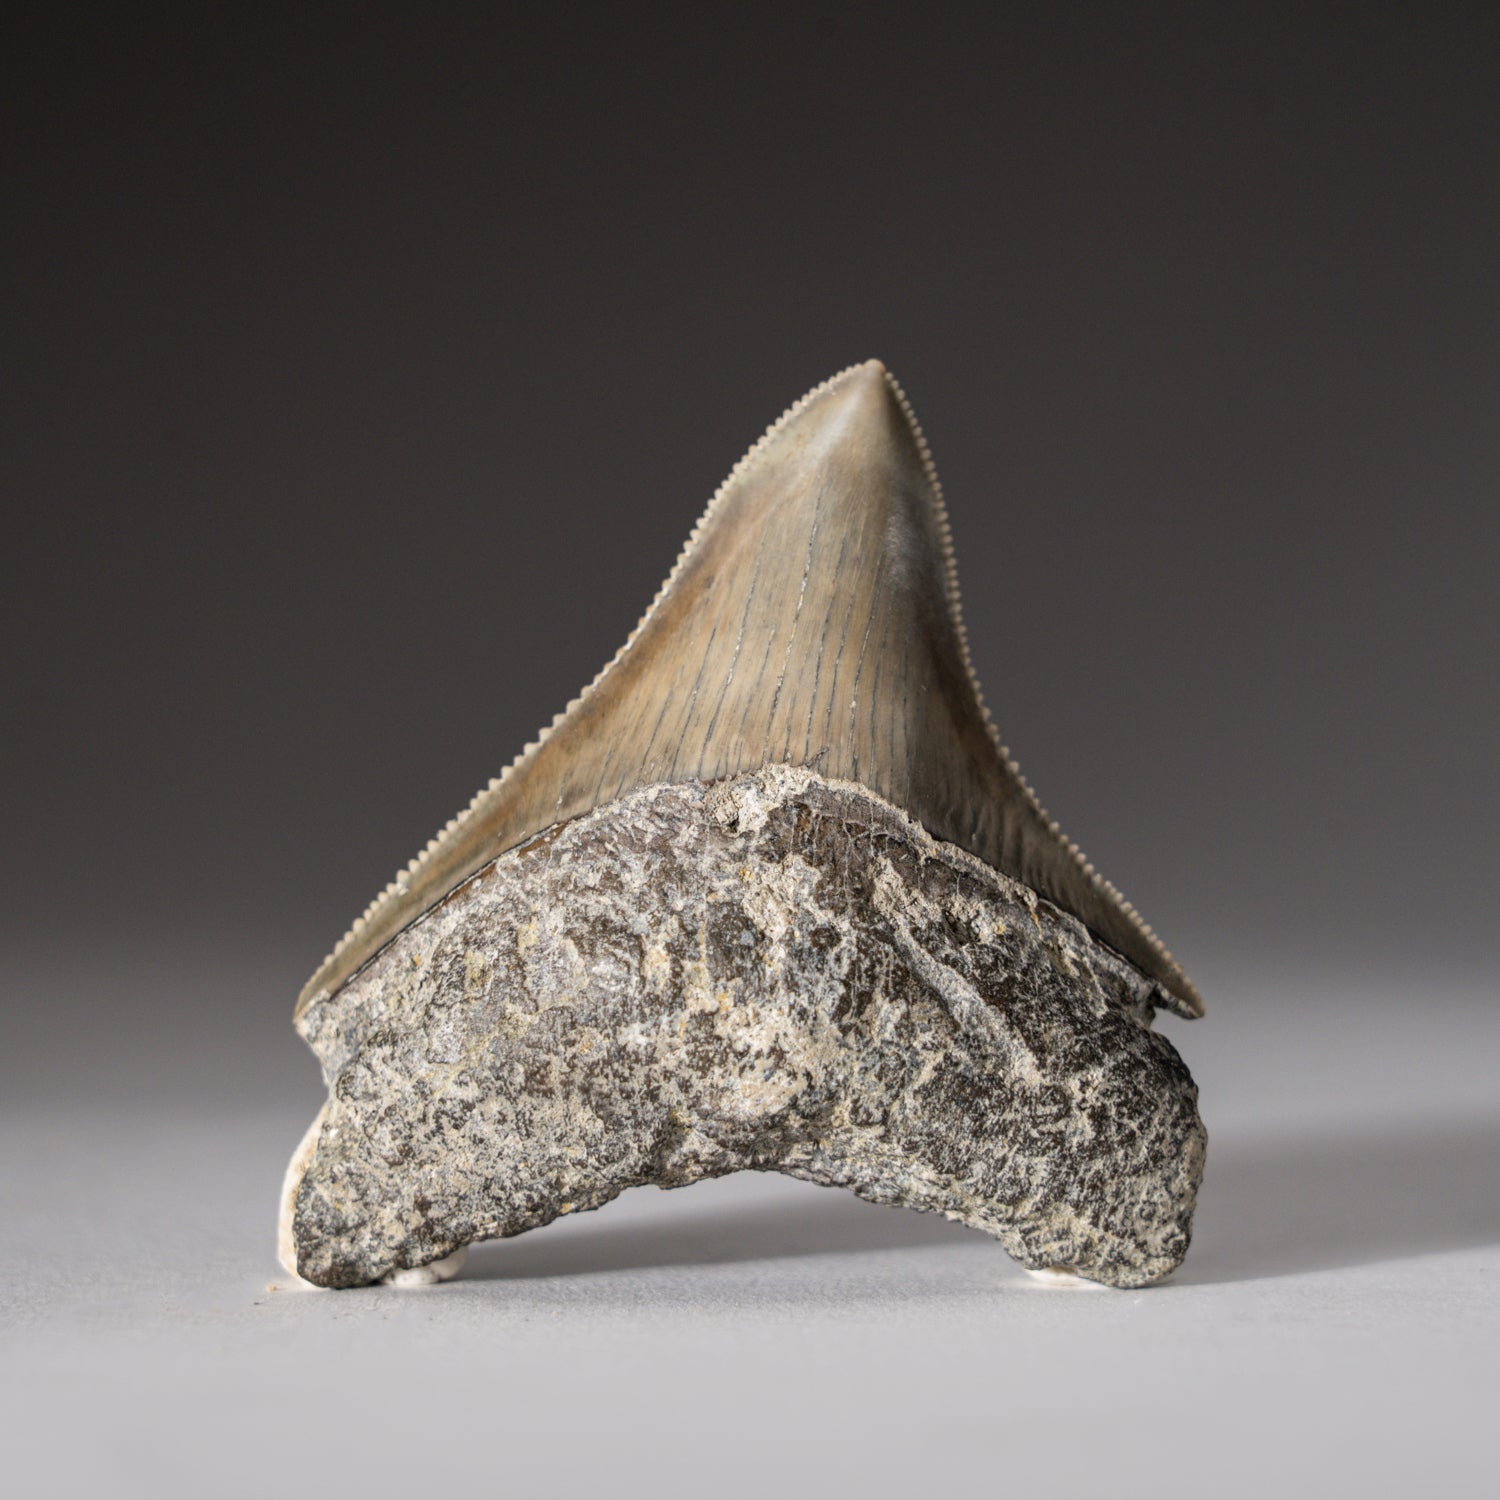 Genuine Serrated Megalodon Shark Tooth from Indonesia in Display Box (30.5 grams)